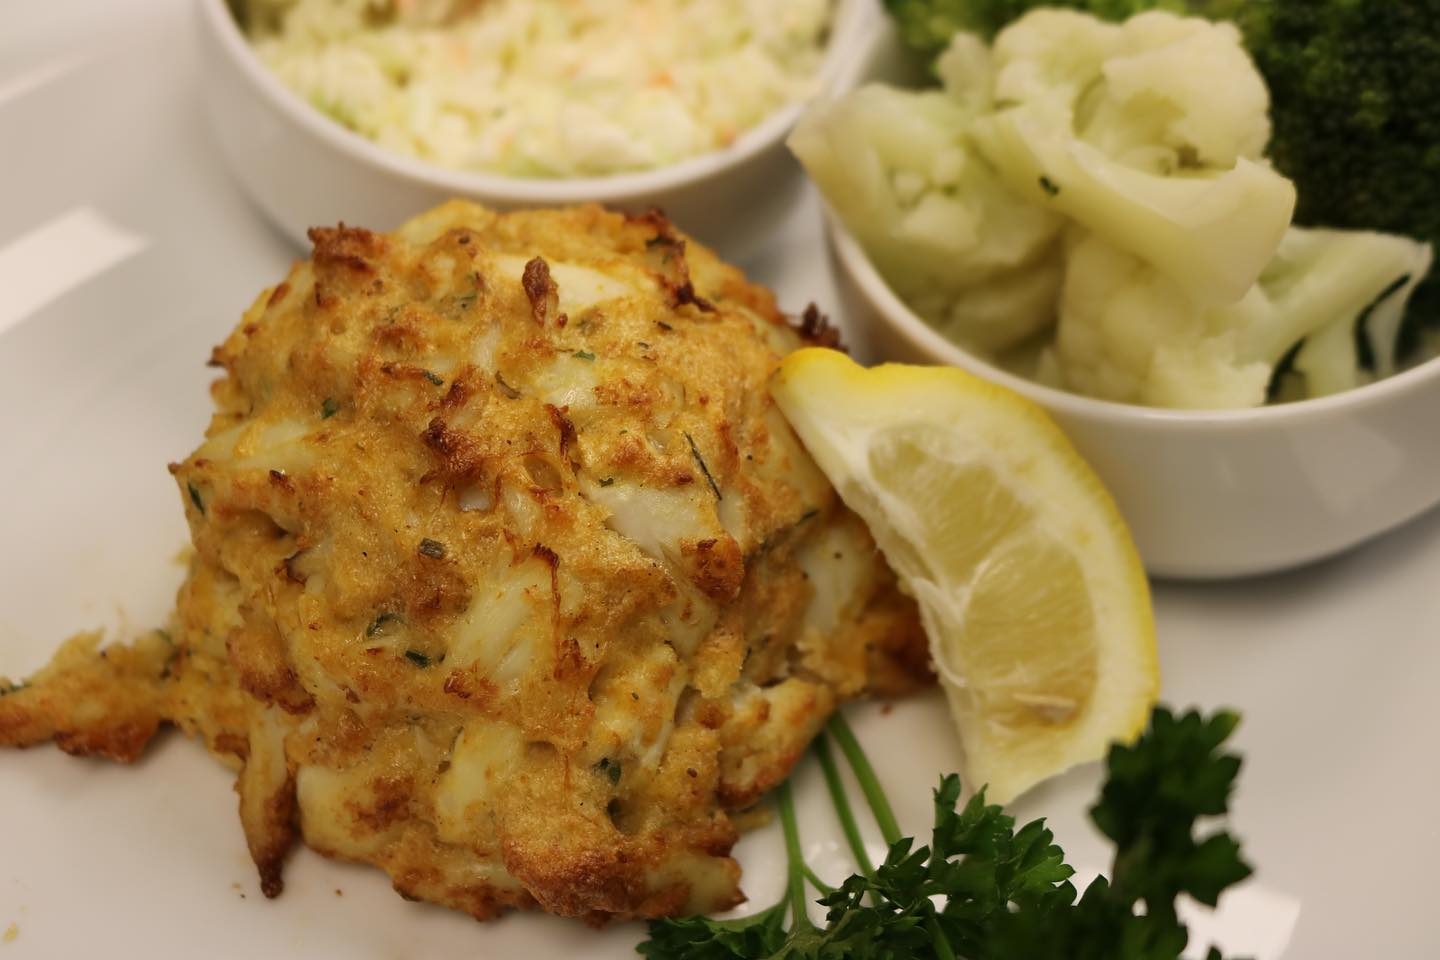 a crab cake with a lemon wedge and two sides